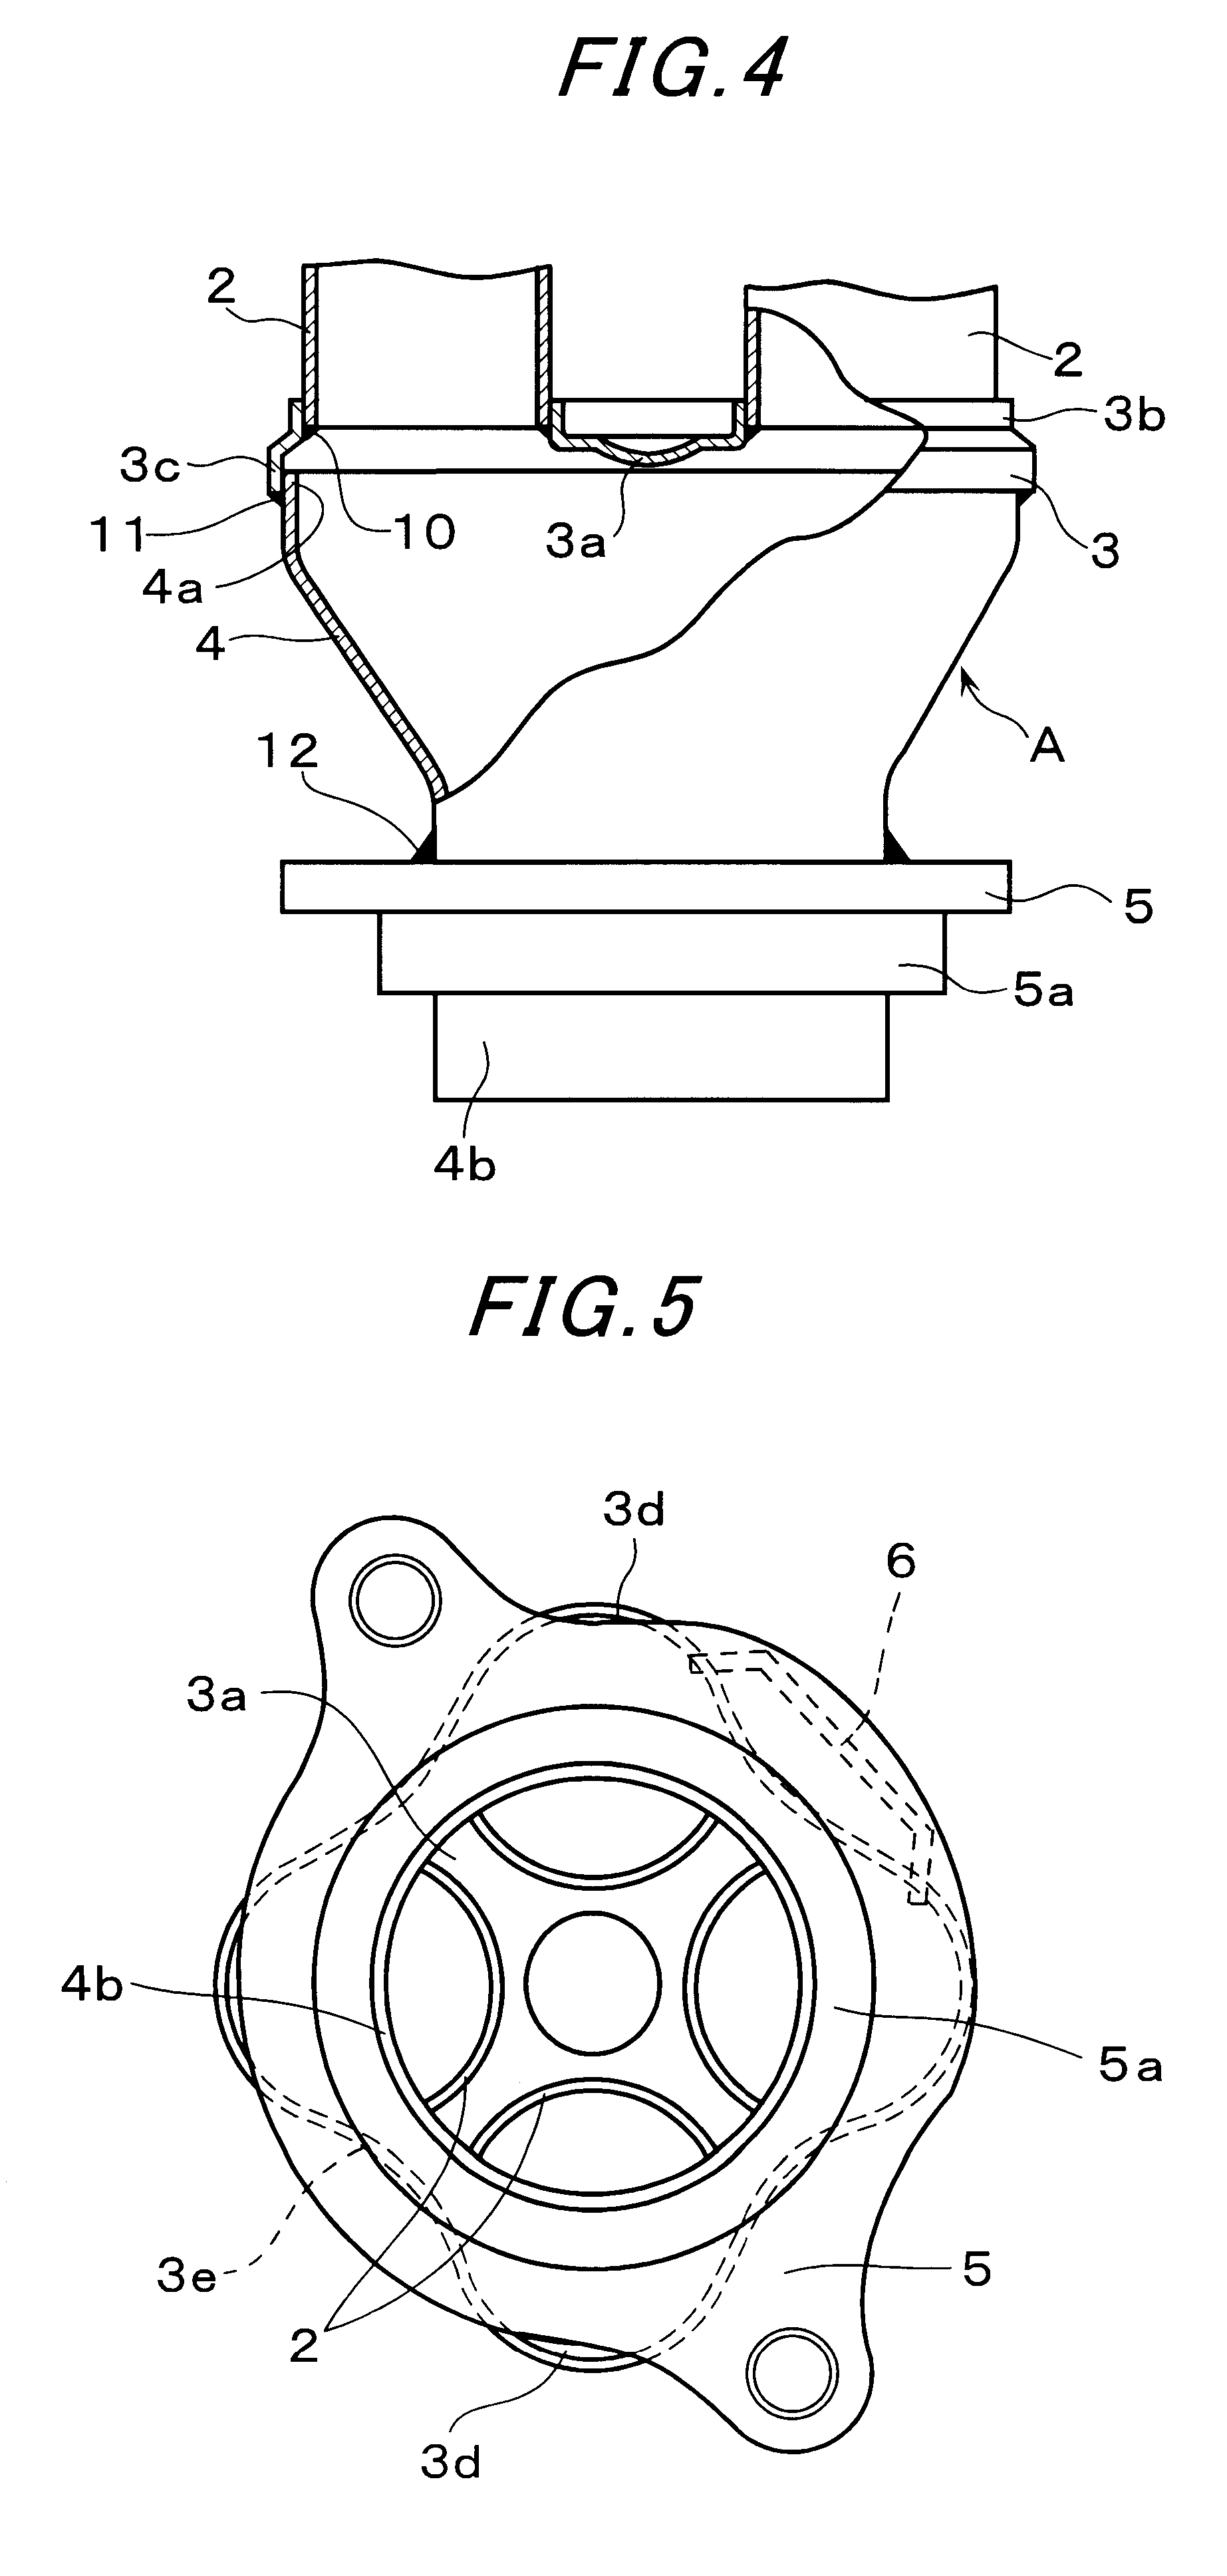 Exhaust pipe assembly for multi-cylinder internal combustion engine